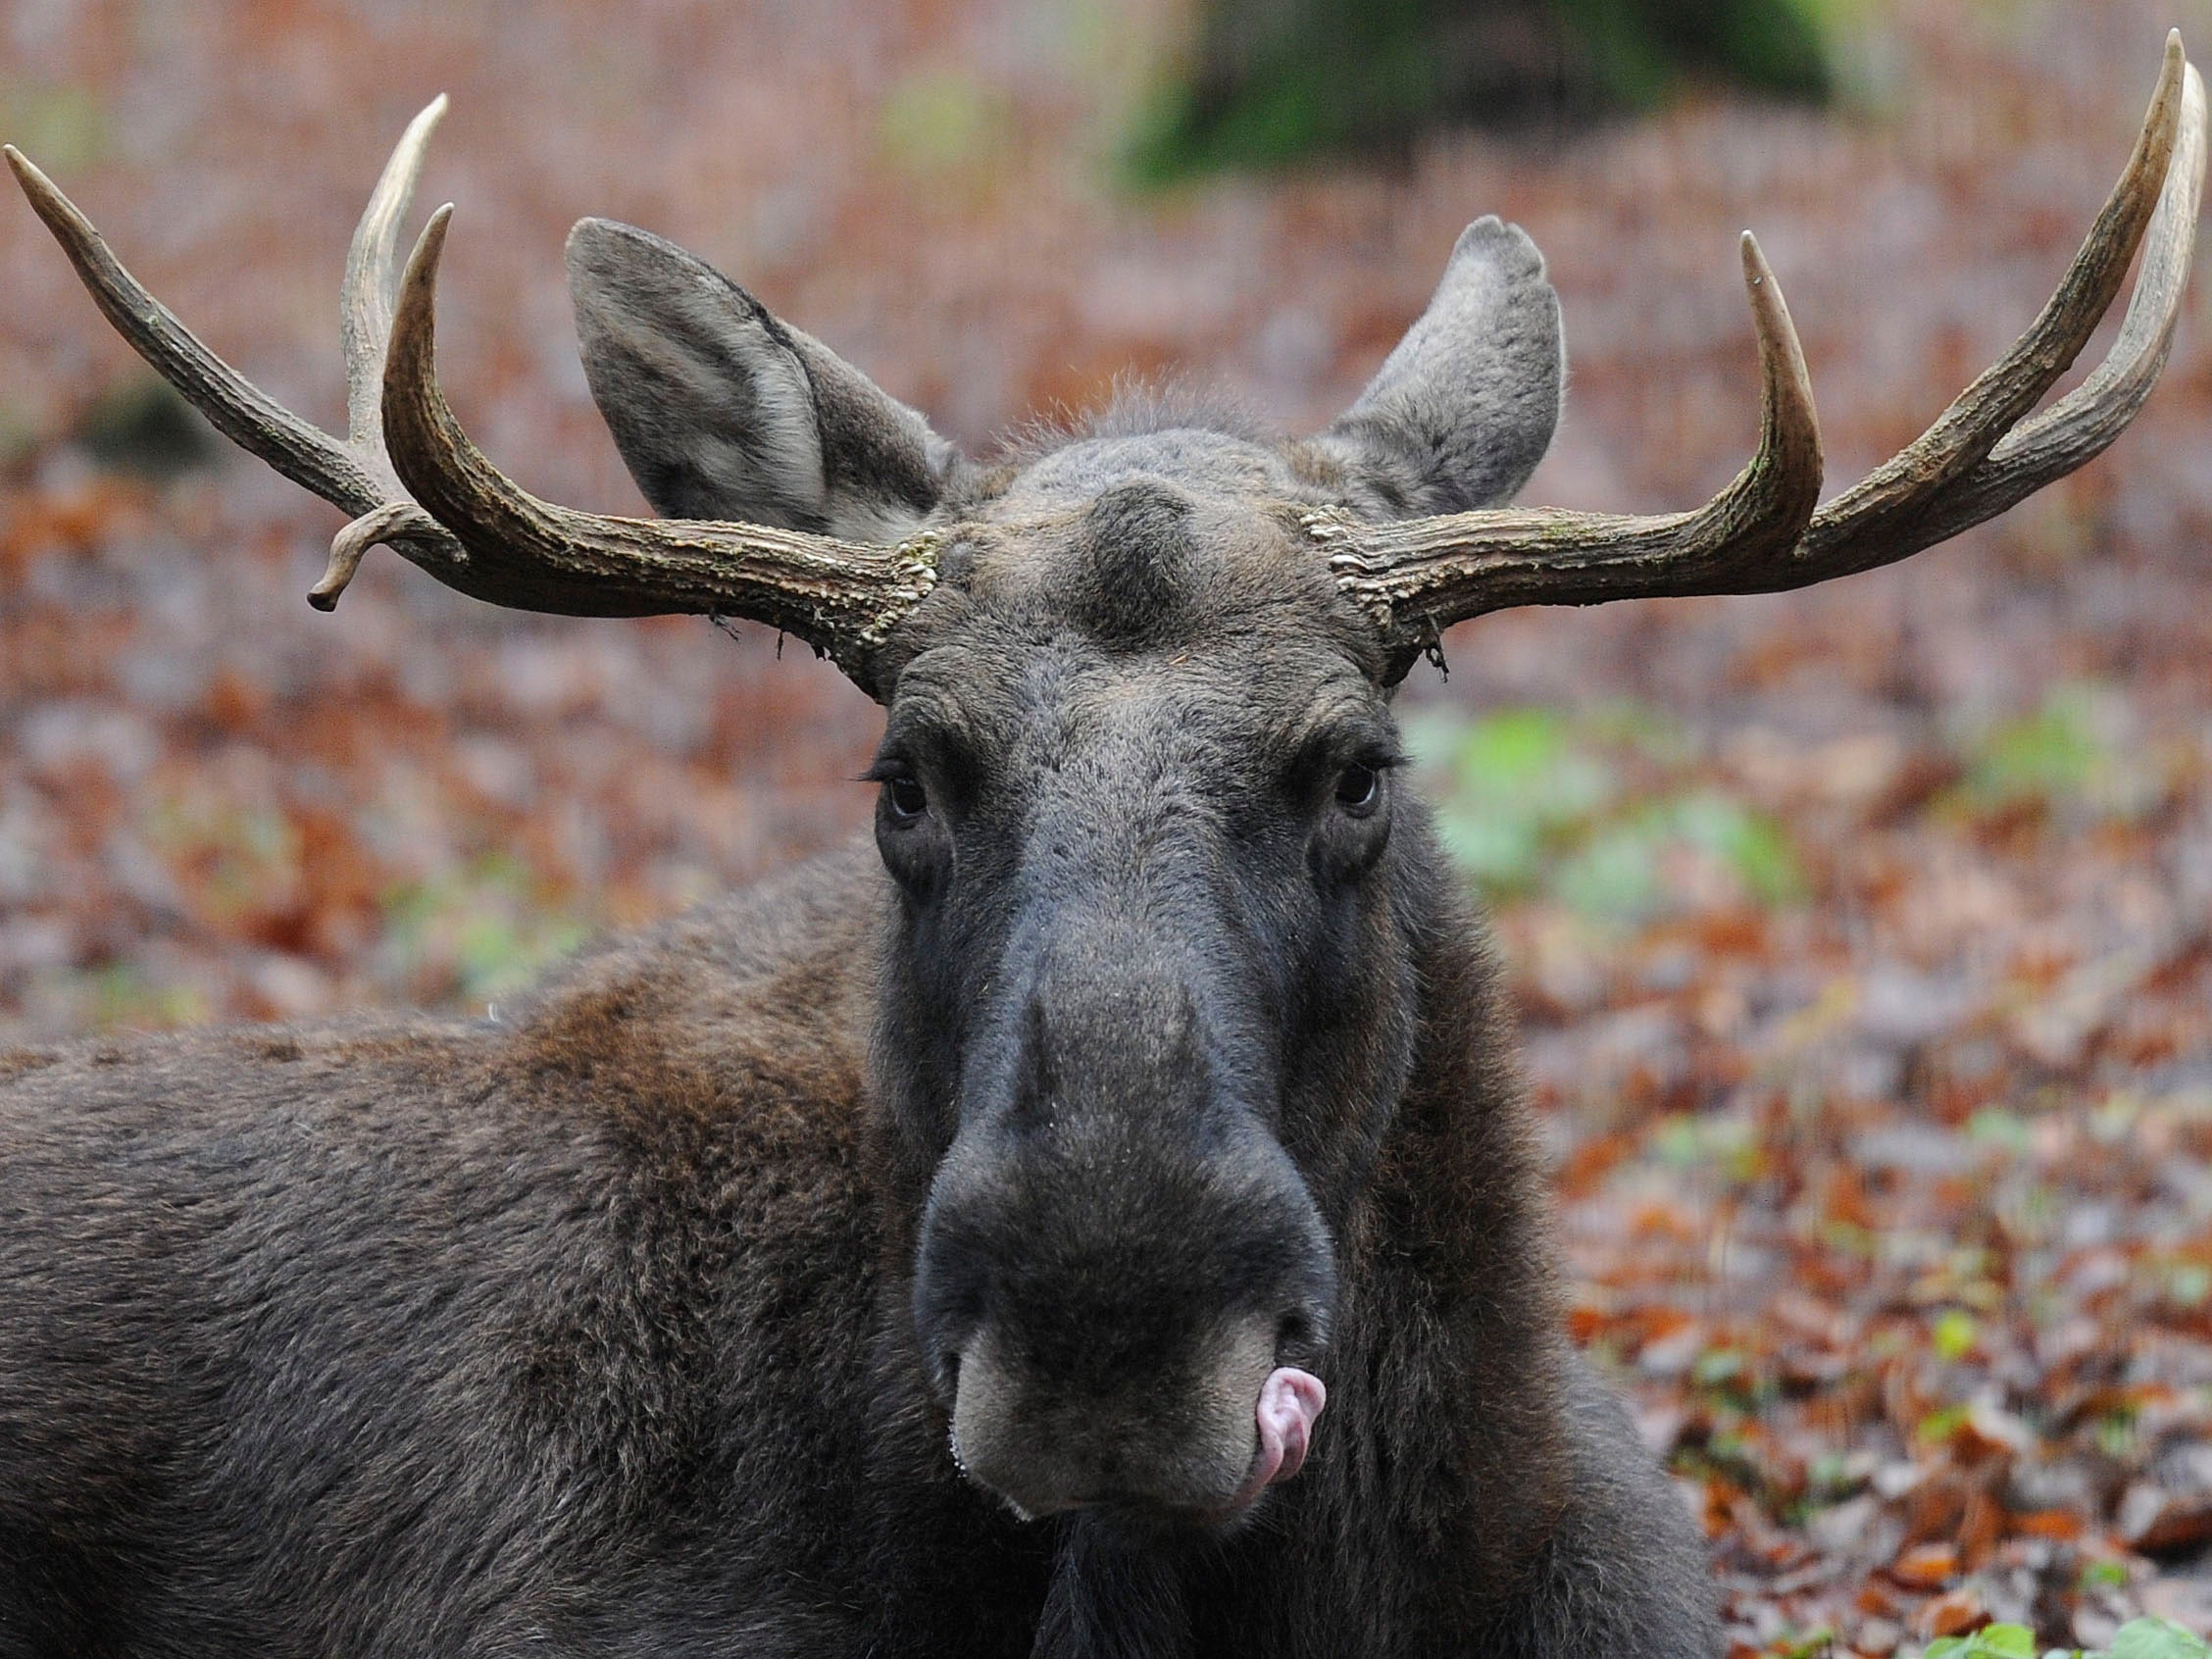 Elk, also sometimes referred to as moose, are not an endangered species